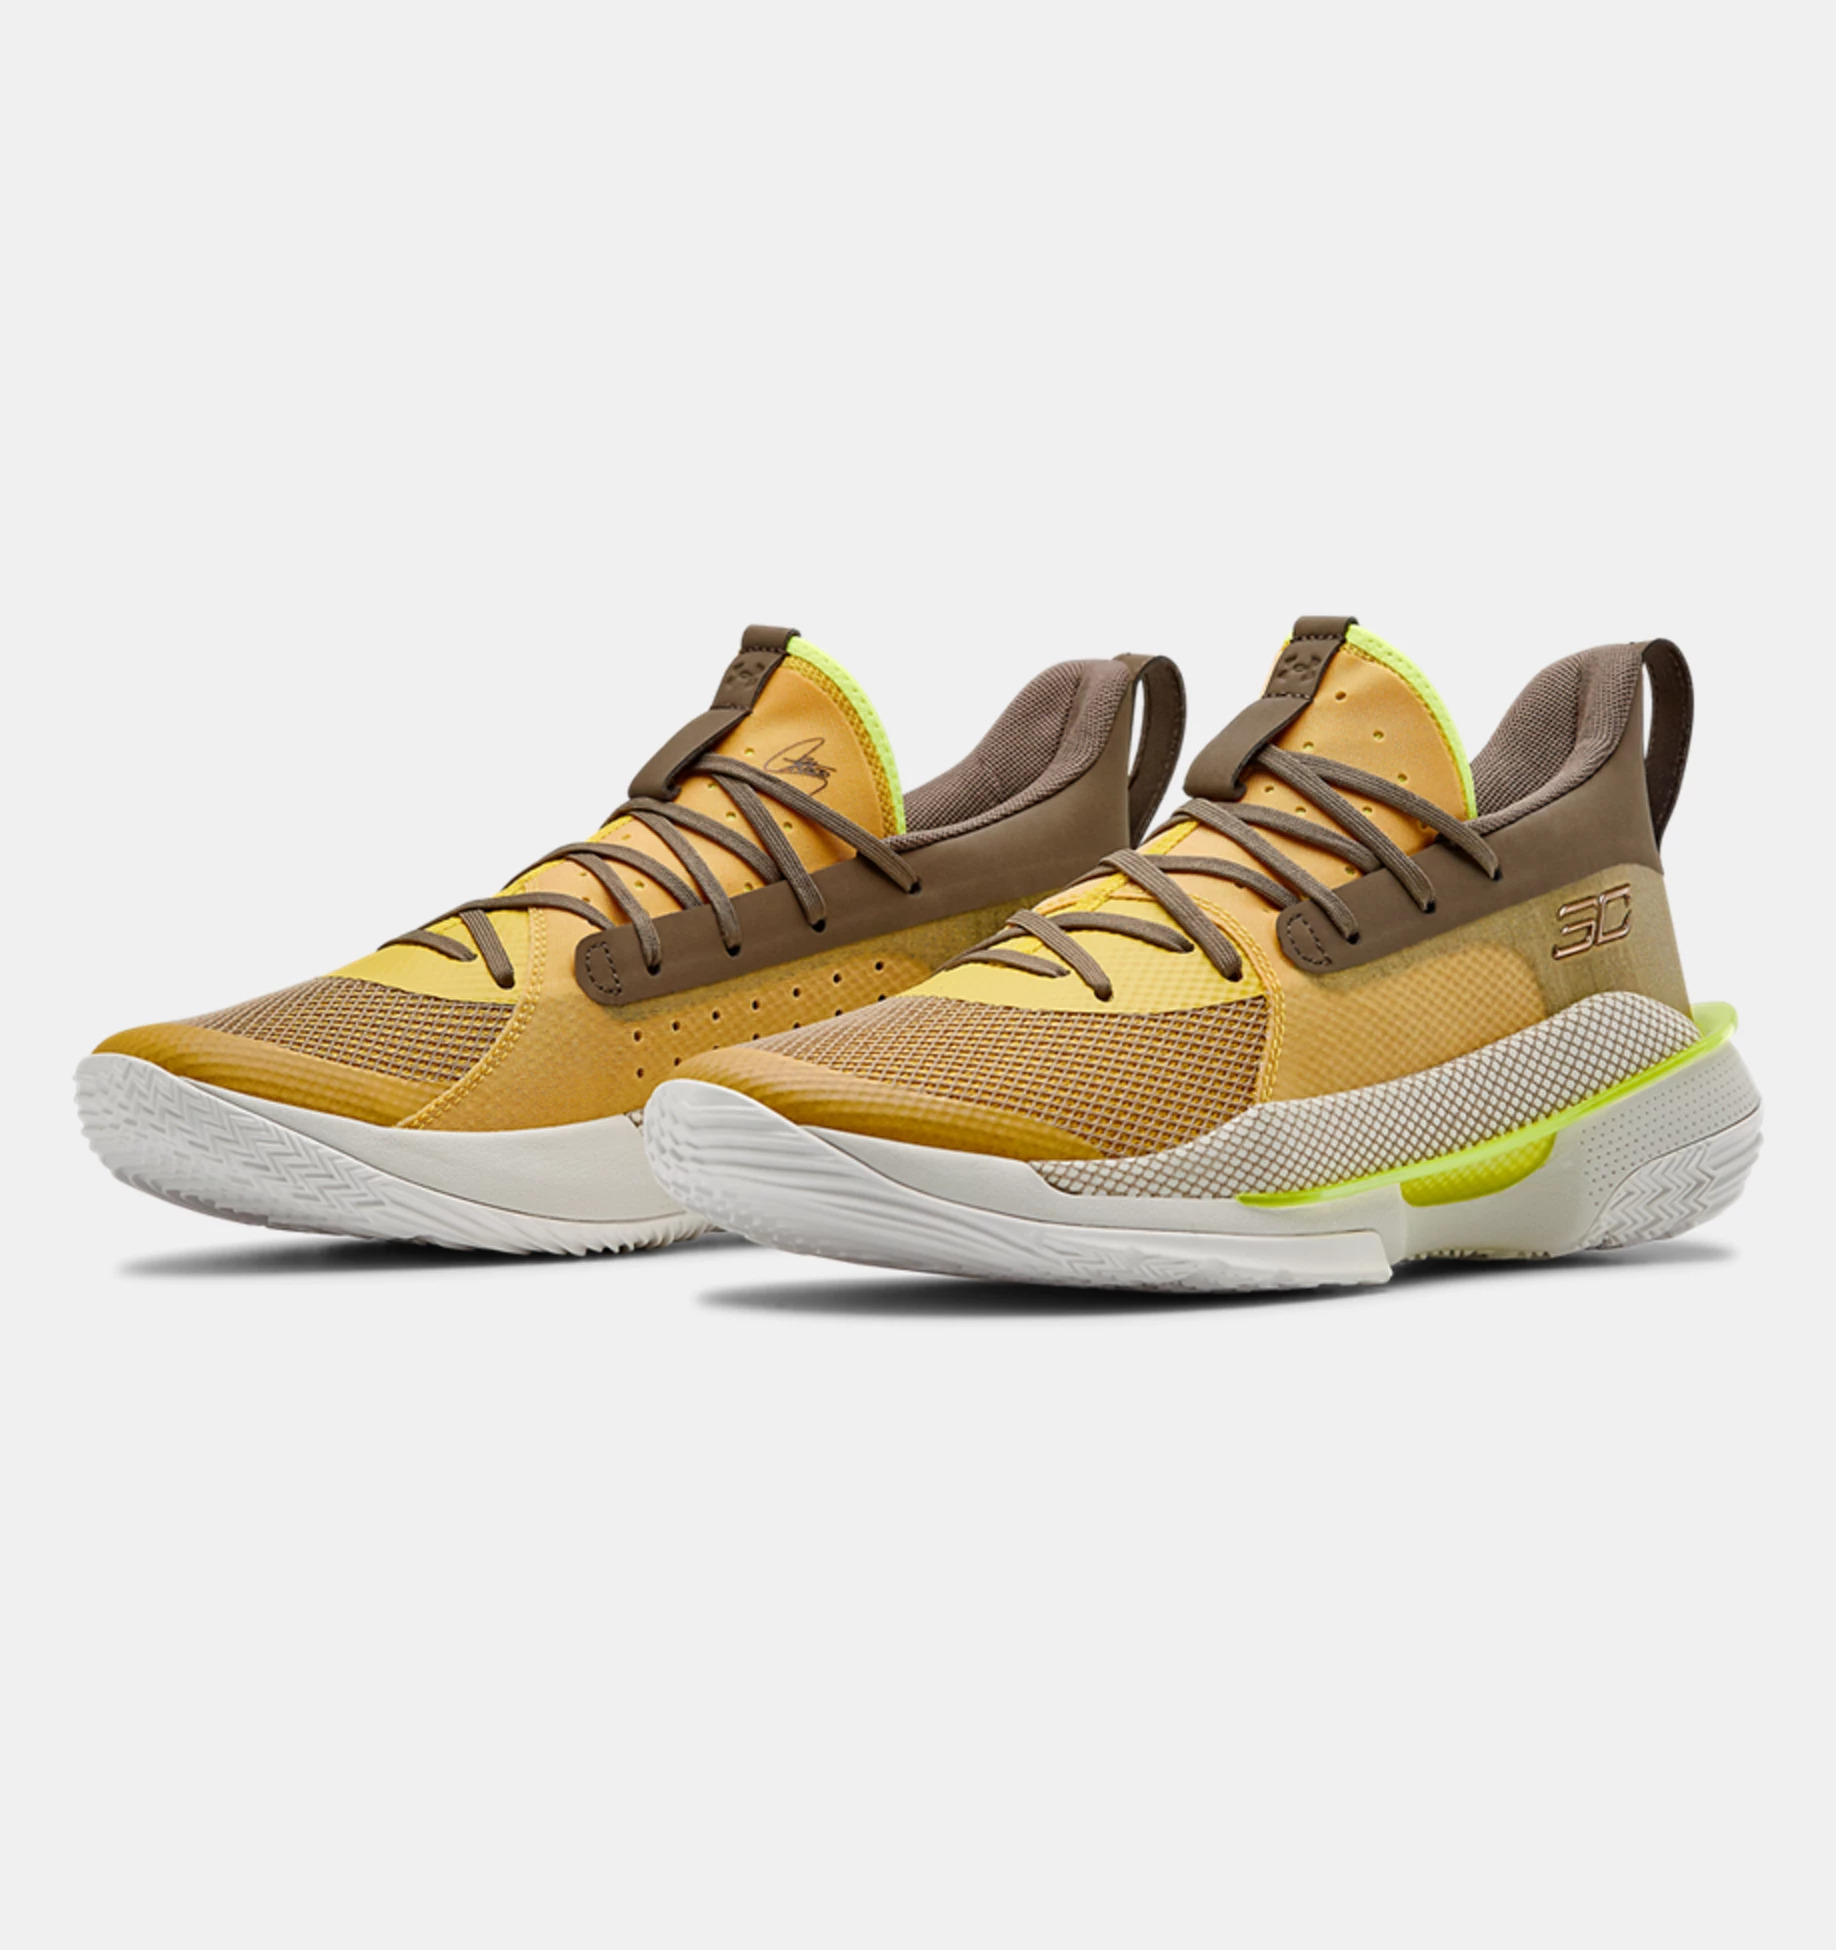 Lightest Basketball Shoes: Curry 7 2